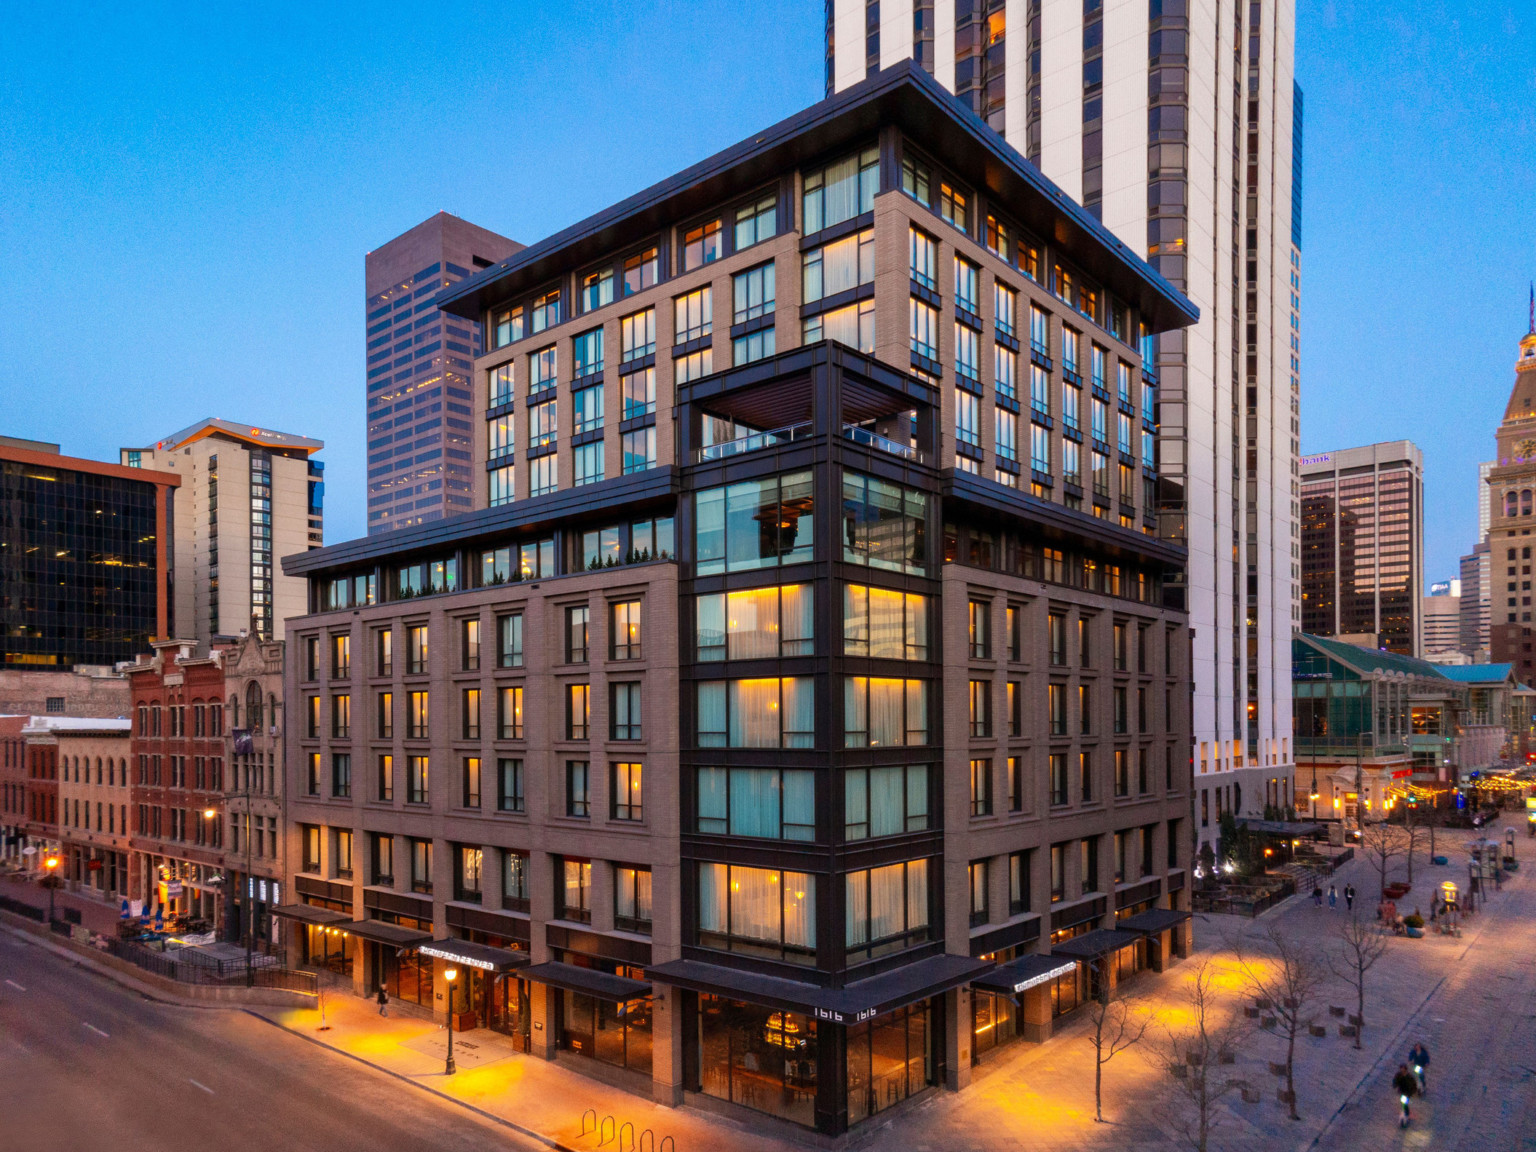 The Thompson Hotel Denver seen from corner with multitoned glass tower and stone facade on each side